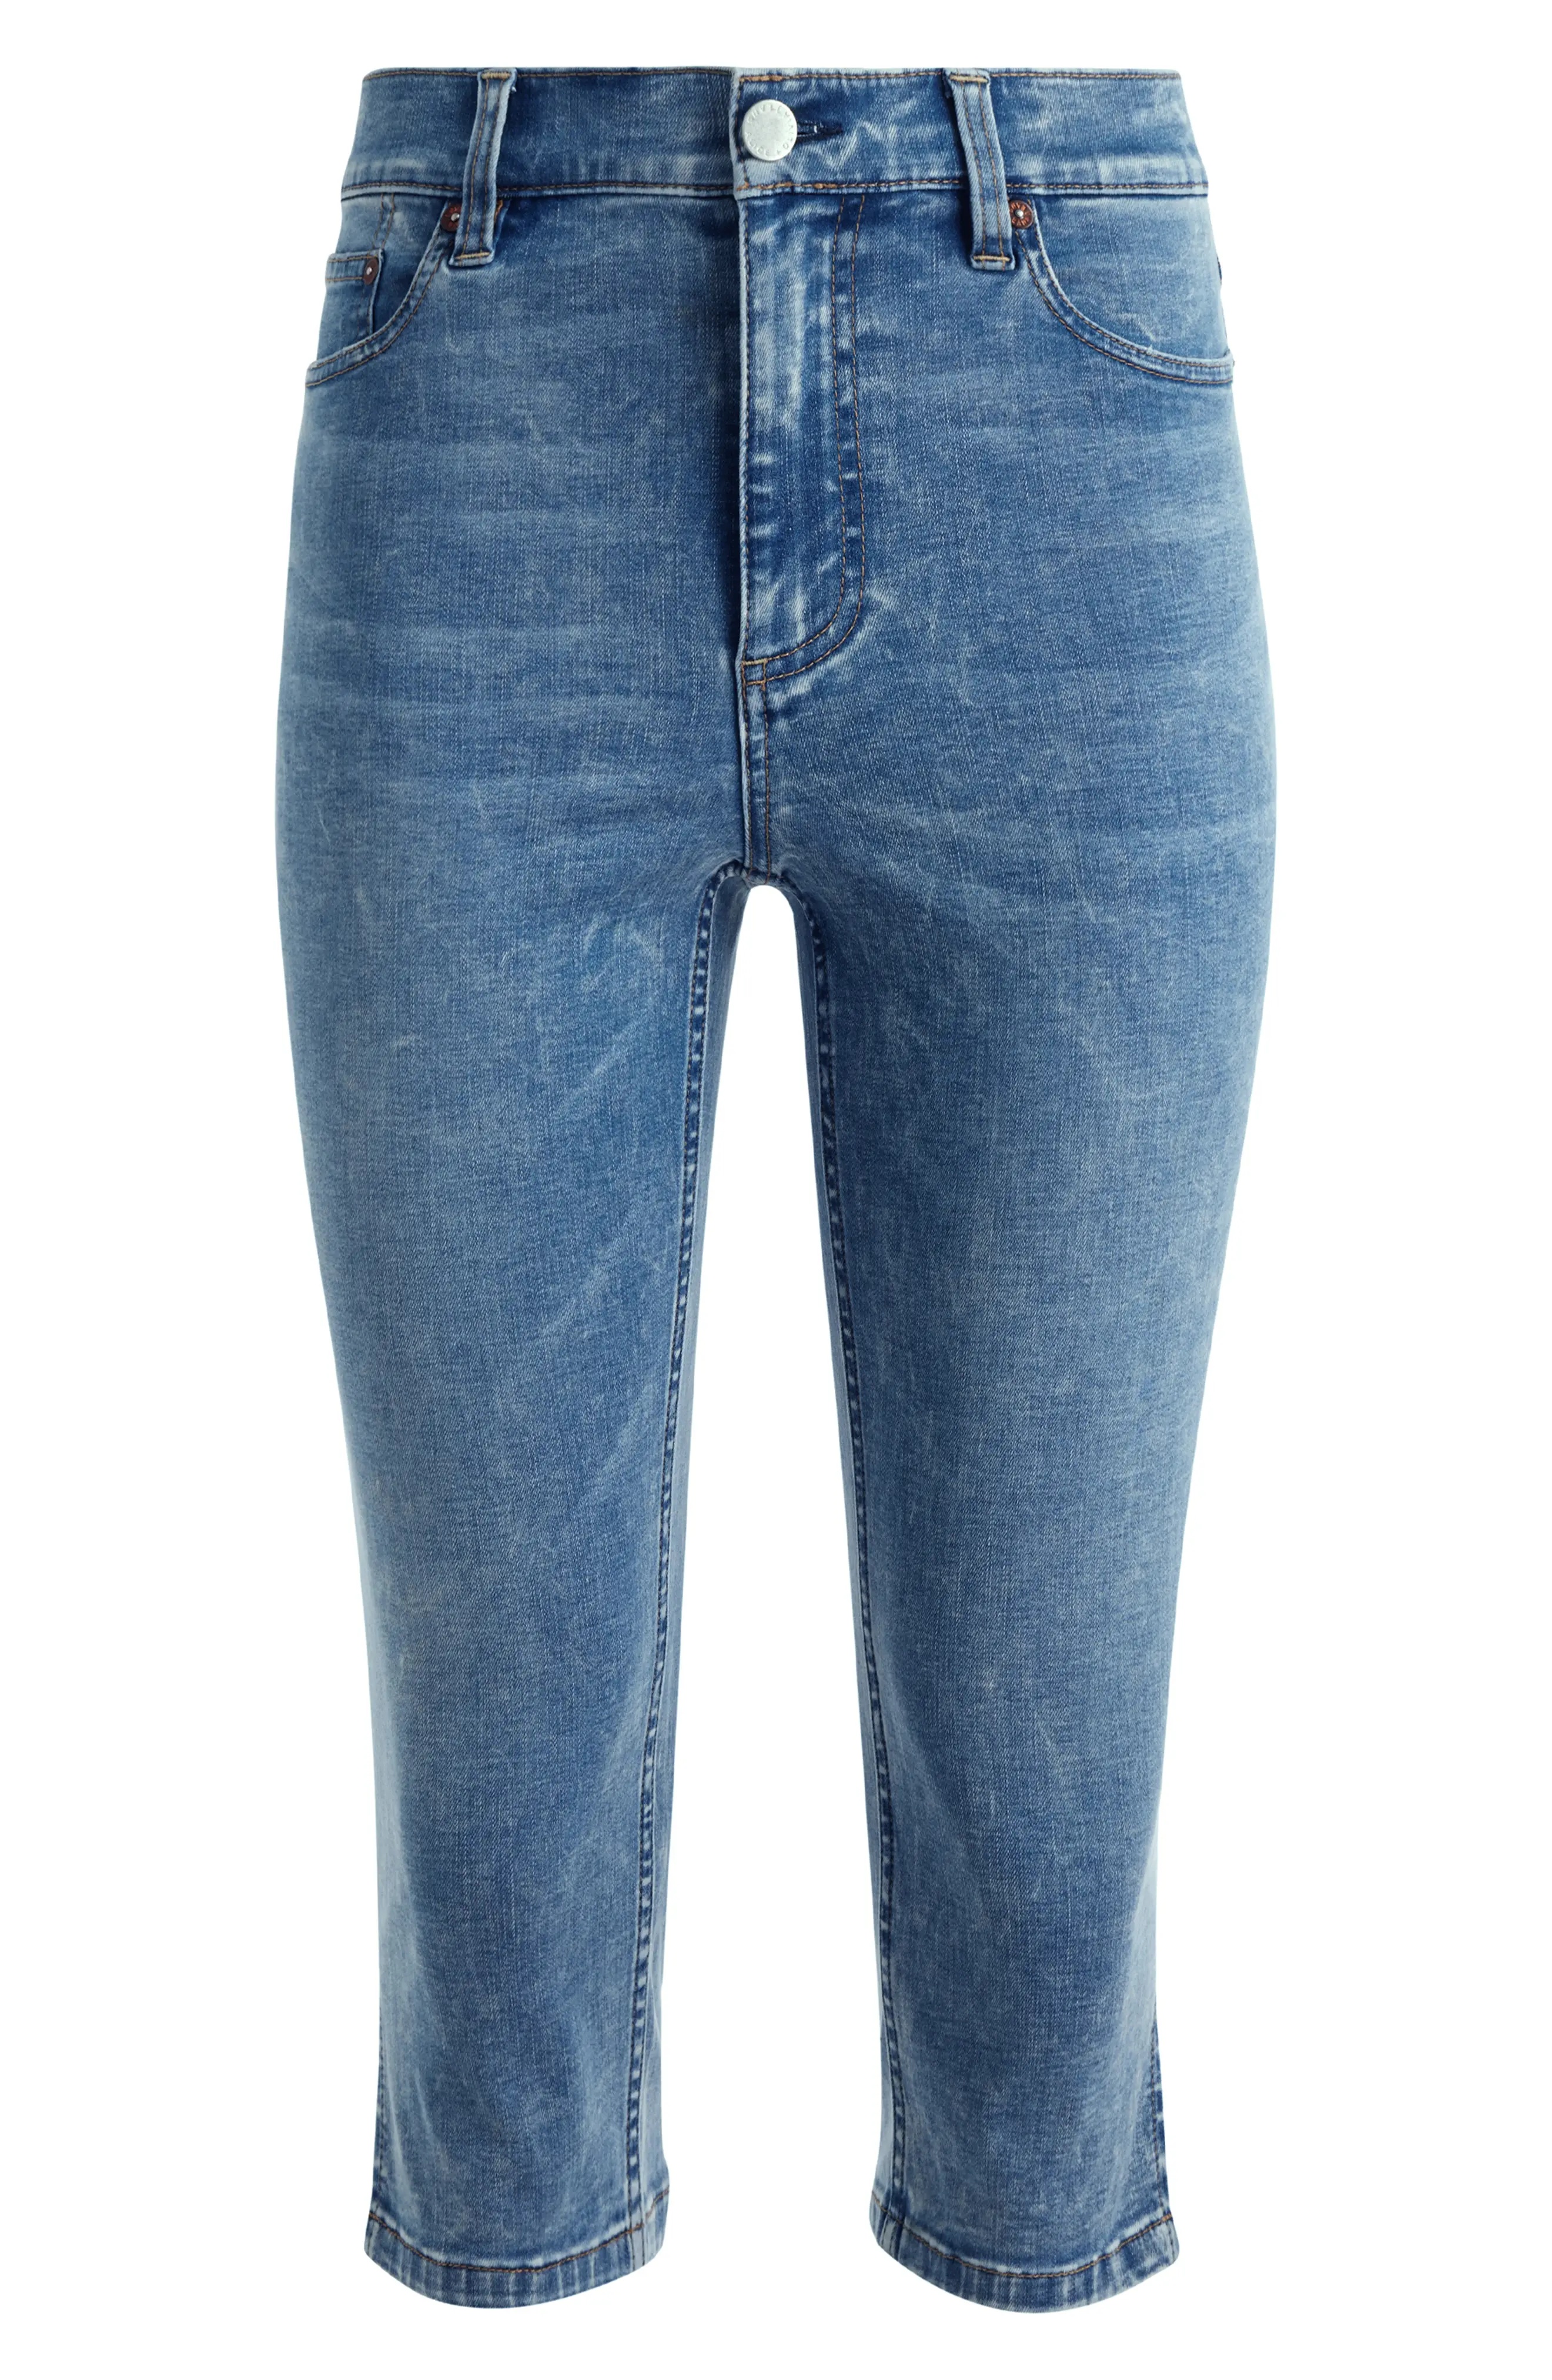 Emmie Clamdigger Jeans - 5